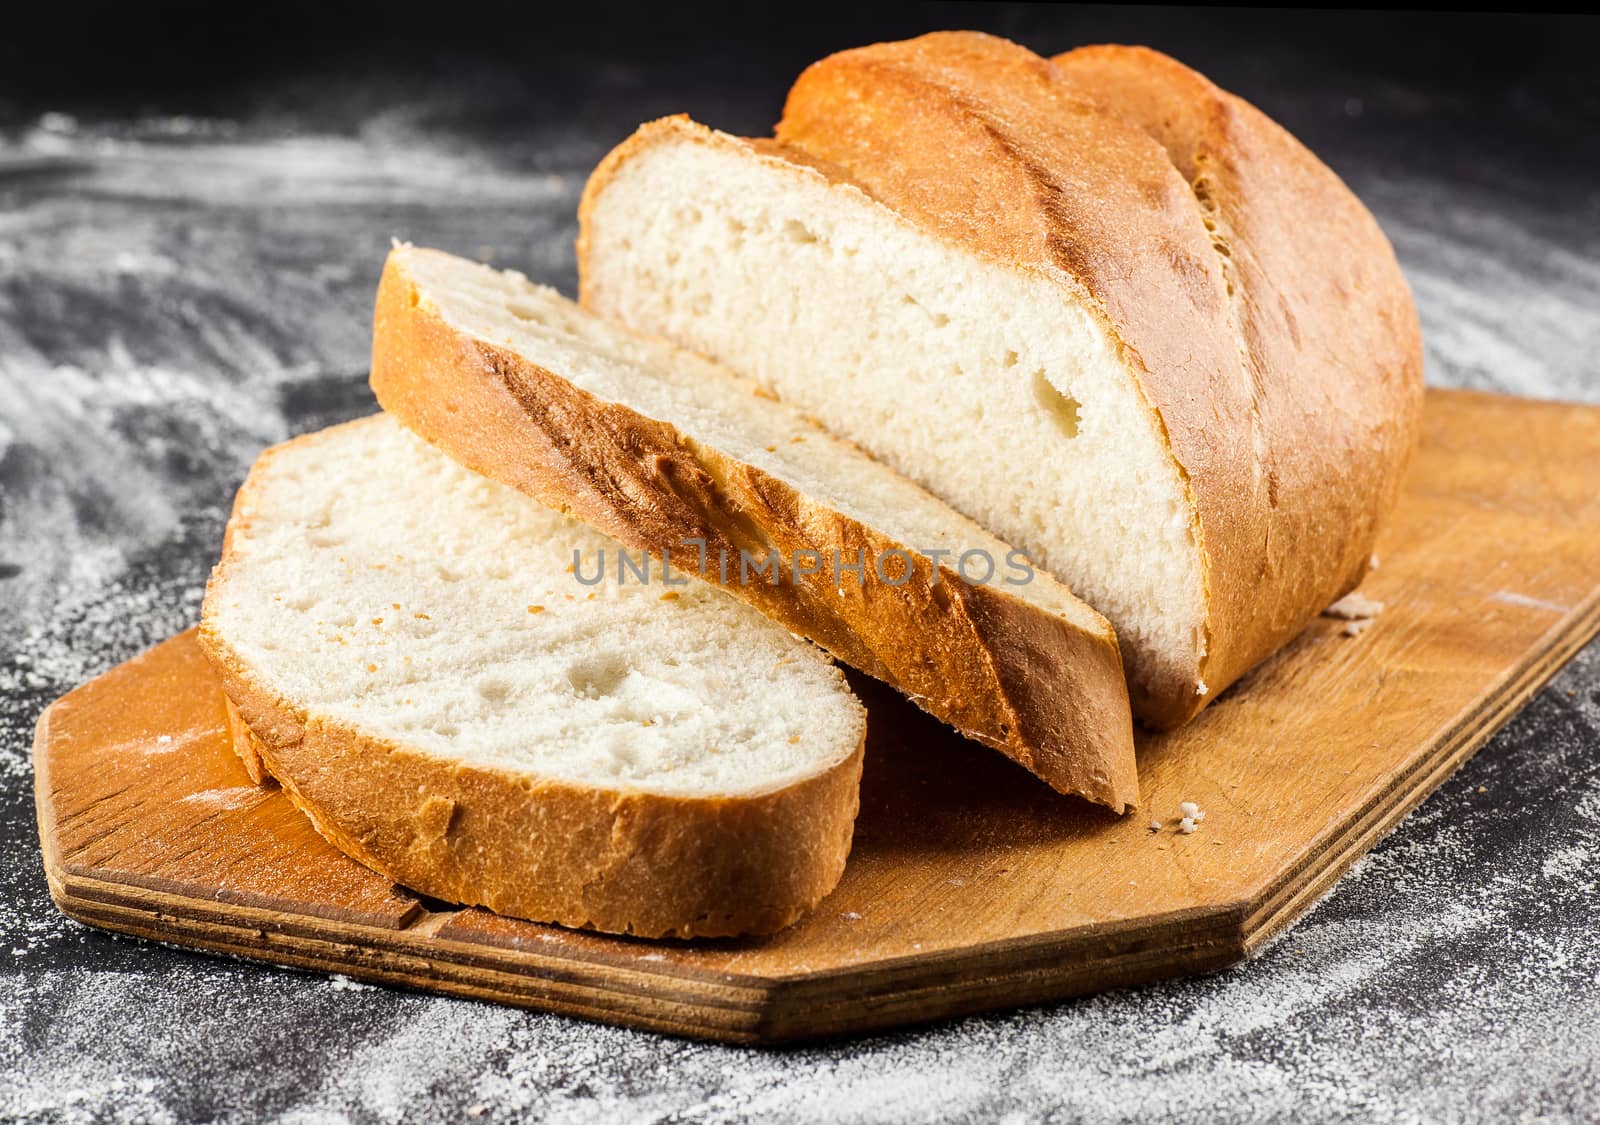 sliced long loaf on a dark background with flour